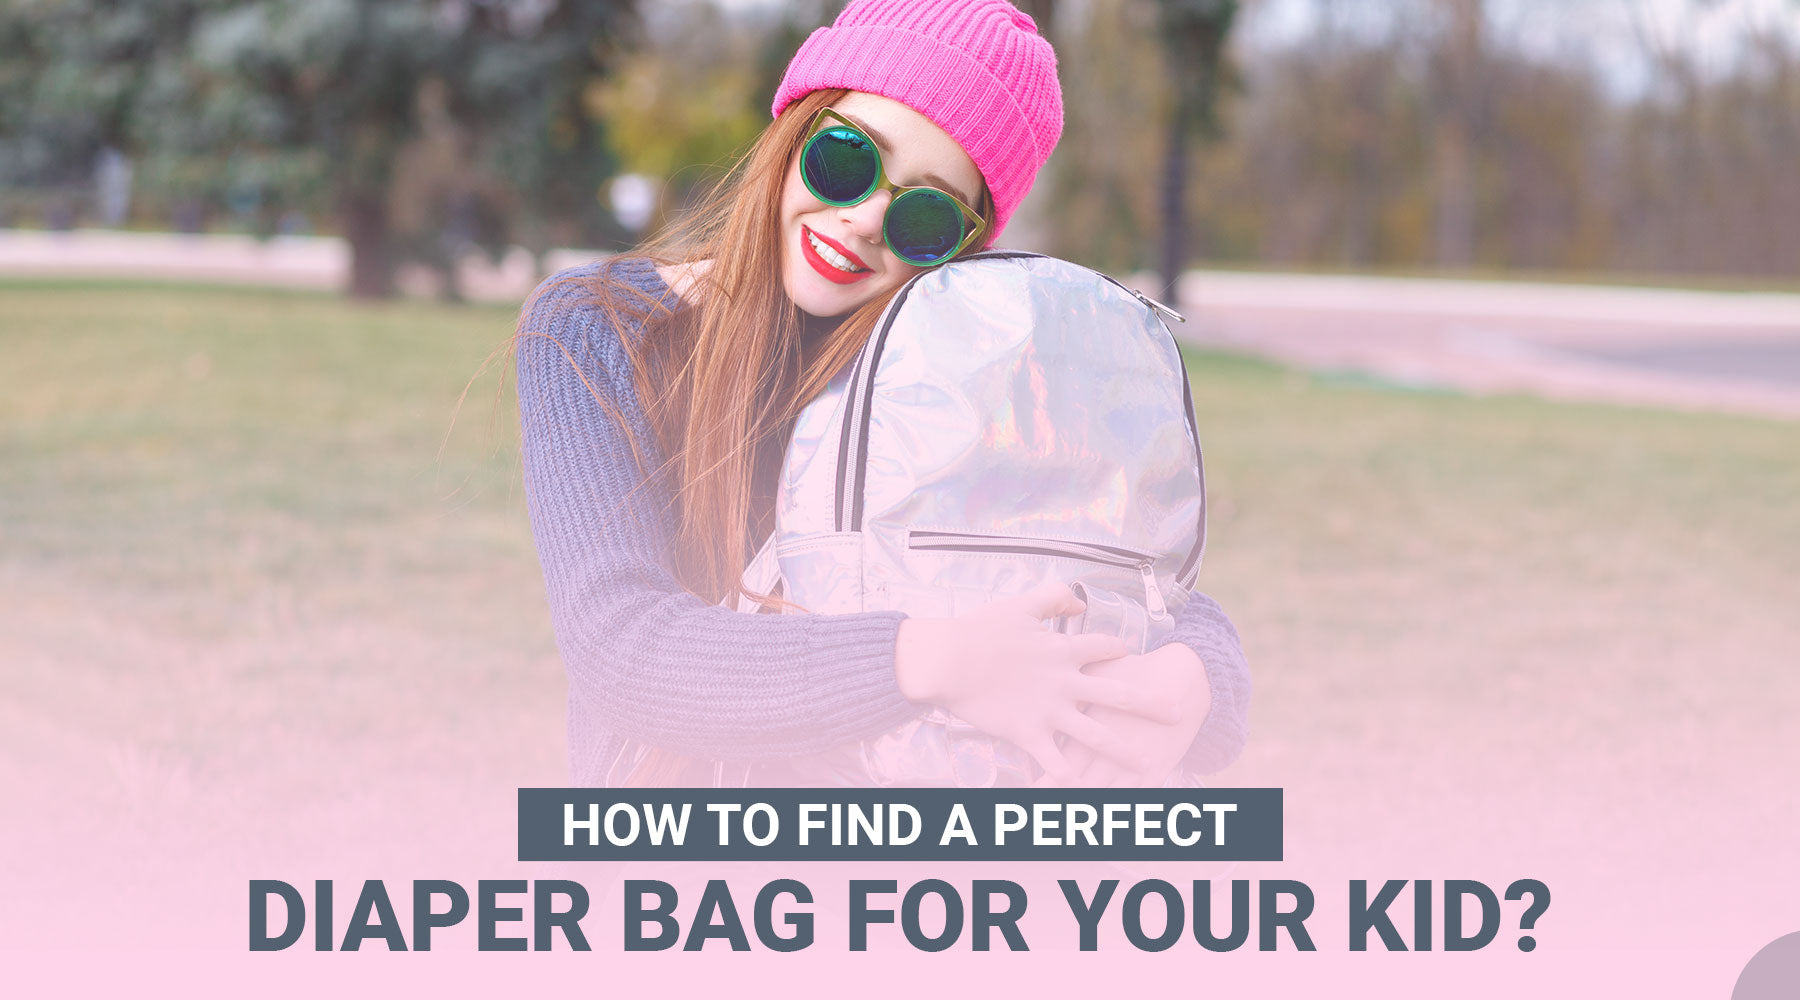 How to Find a Perfect Diaper Bag for Your Kid?